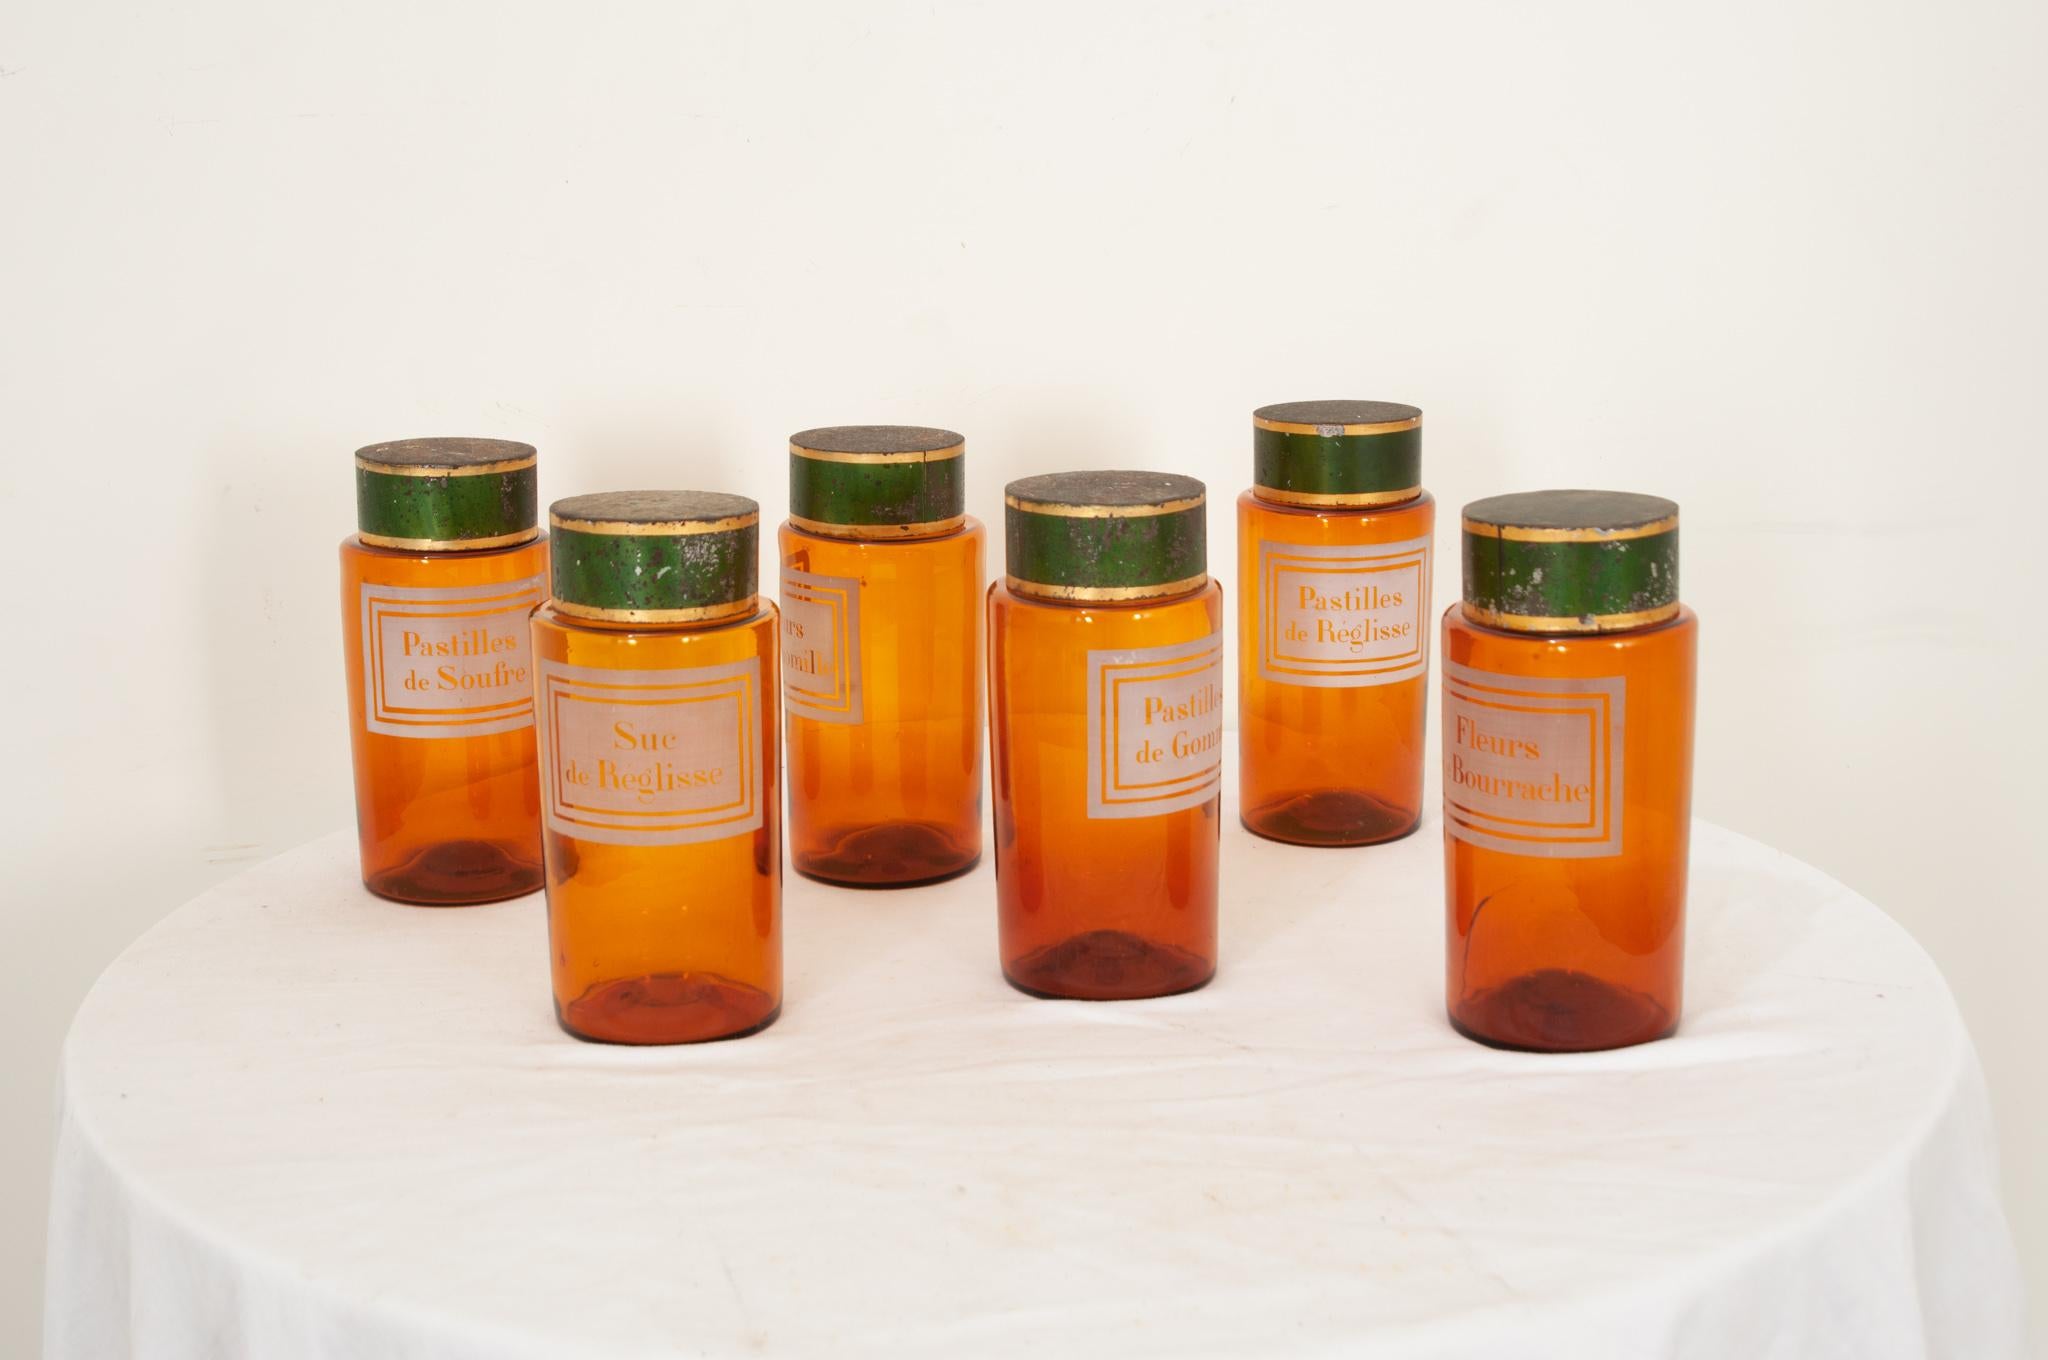 Six amber glass apothecary jars with their original green and gold tin covers from France. Stenciled, painted labels on each jar indicate their would-be contents. Three jars are complete with fitted cork tops that seal the opening under the green